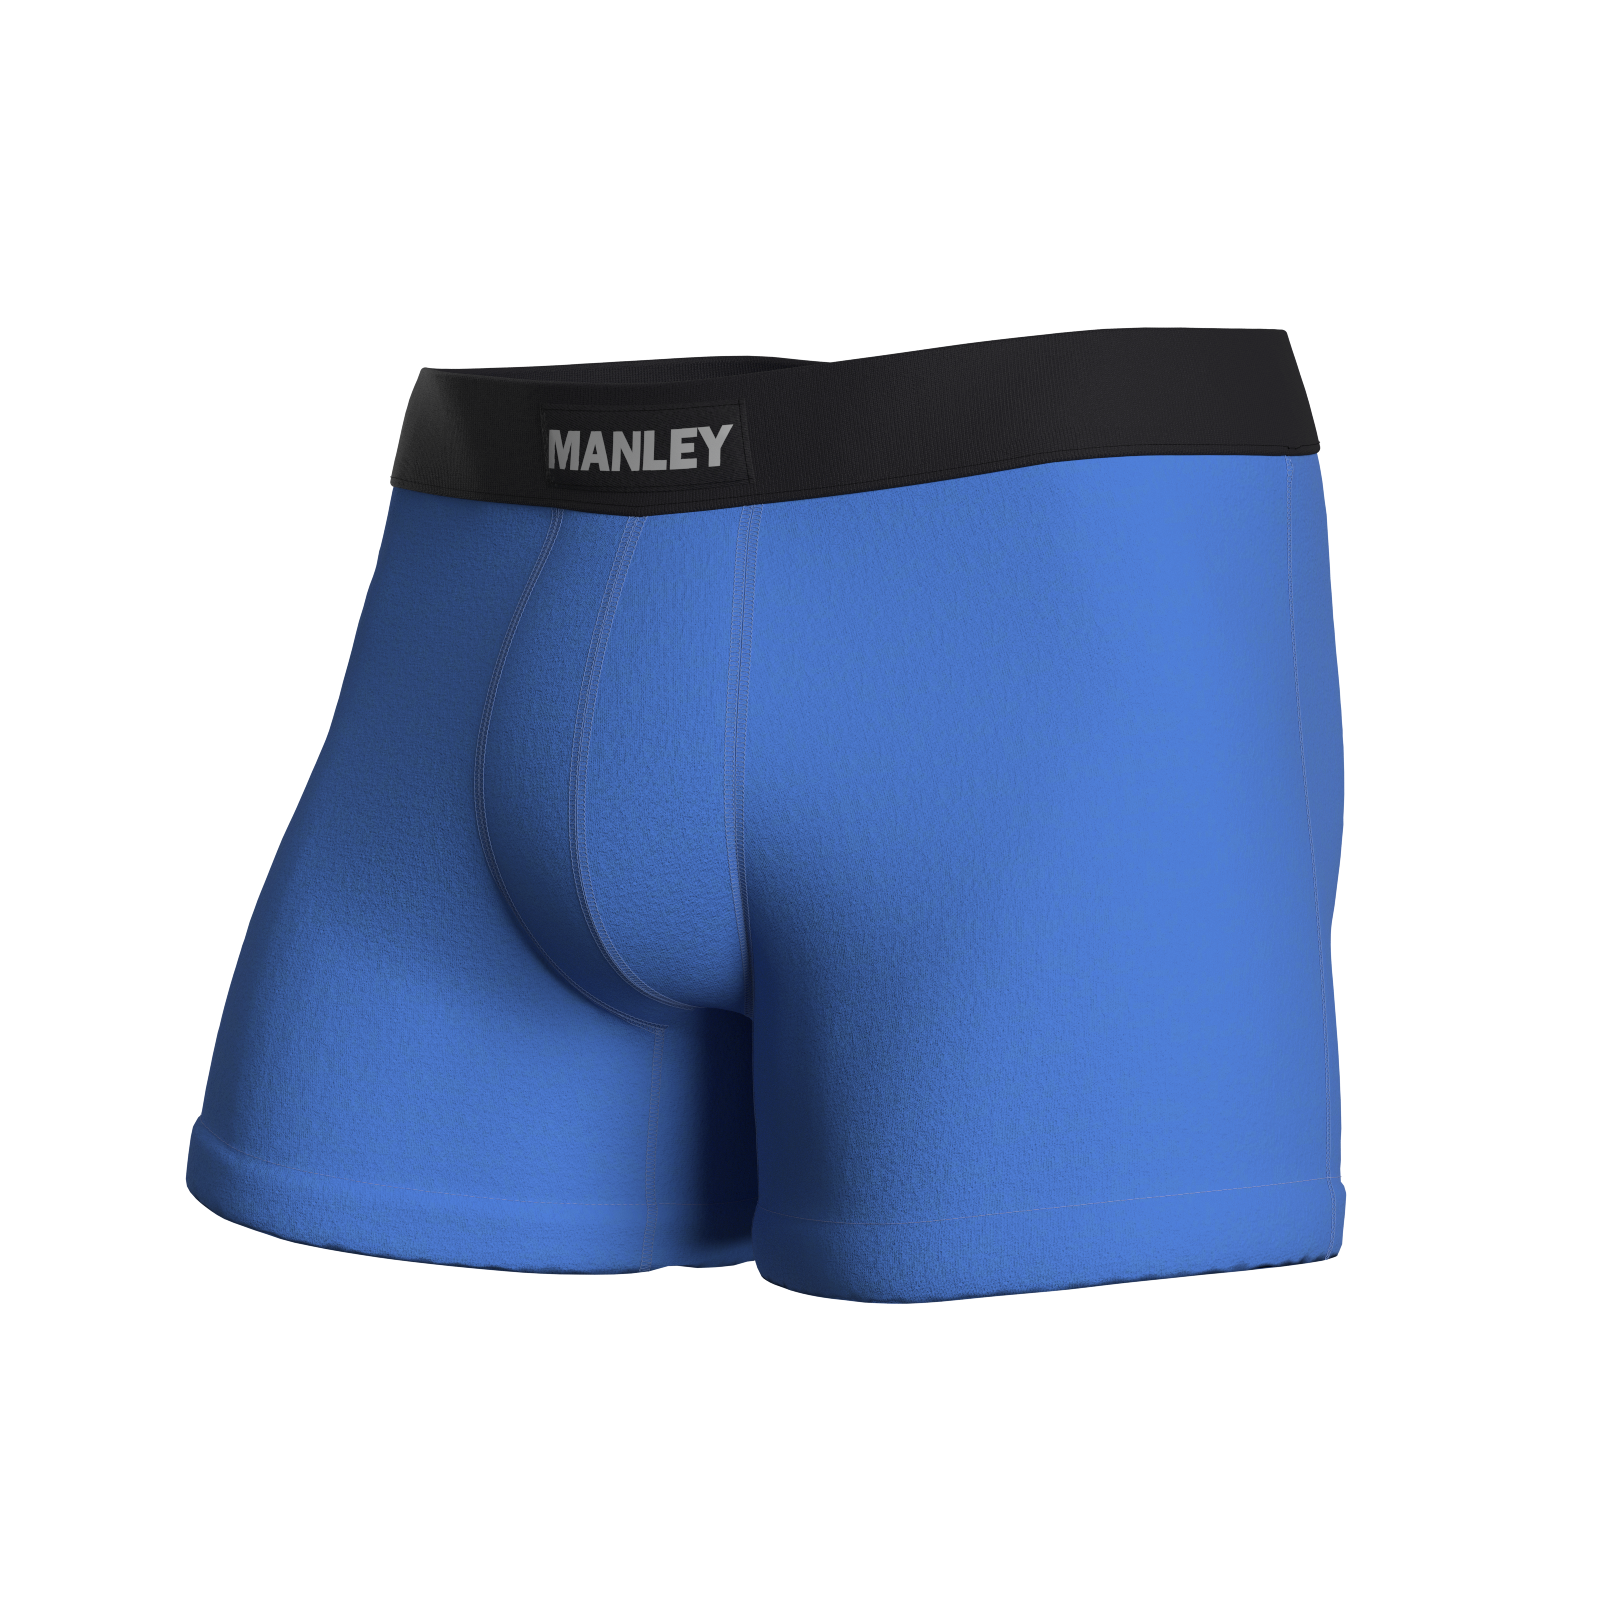 Eclectic Blue boxer briefs with Manley Barrier Technology that stops the pee spot. Feel manly in Manley. Eclectic Blue